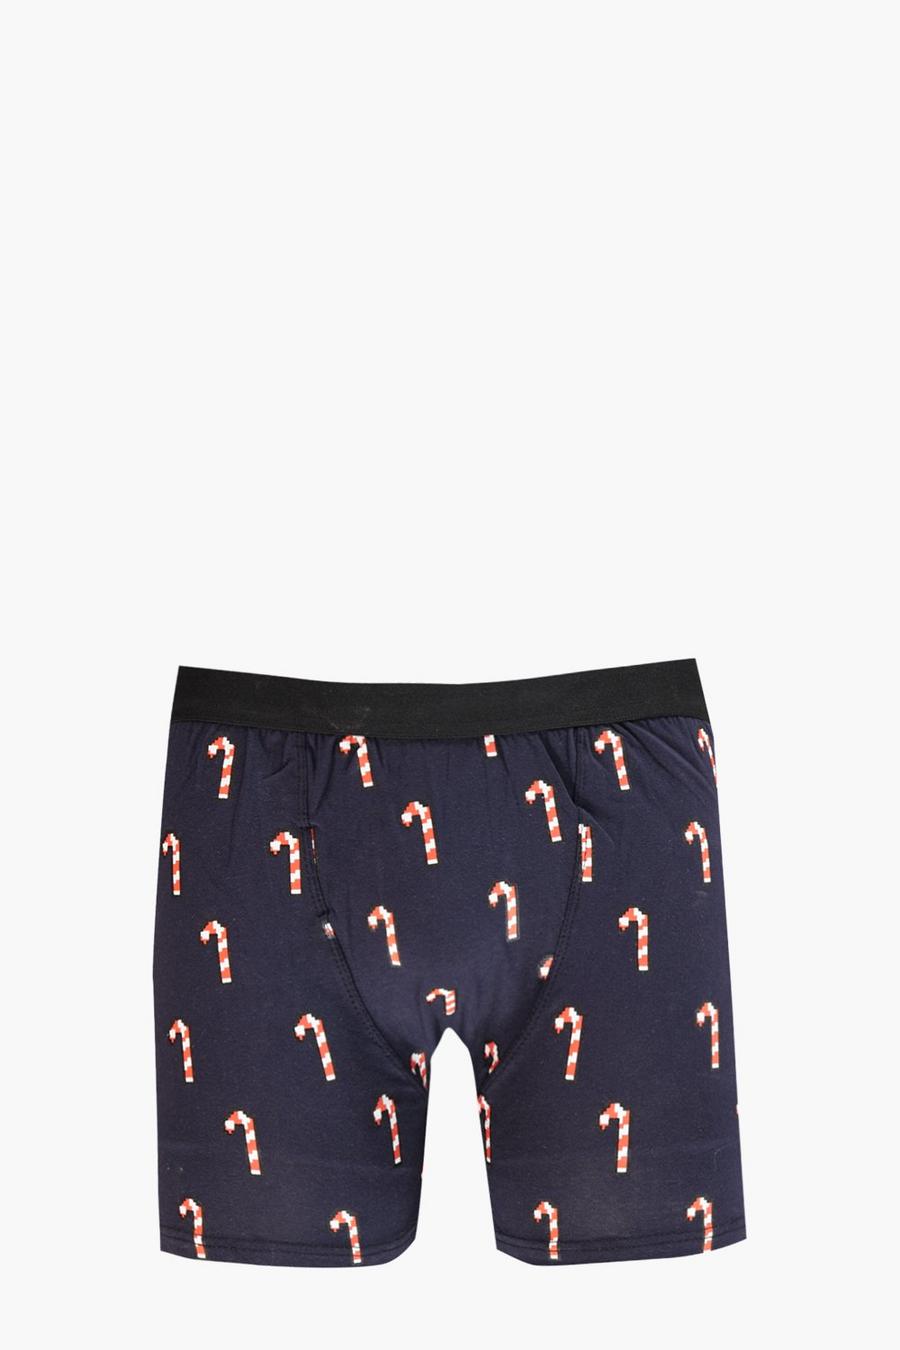 Navy Candy Cane Christmas Boxers